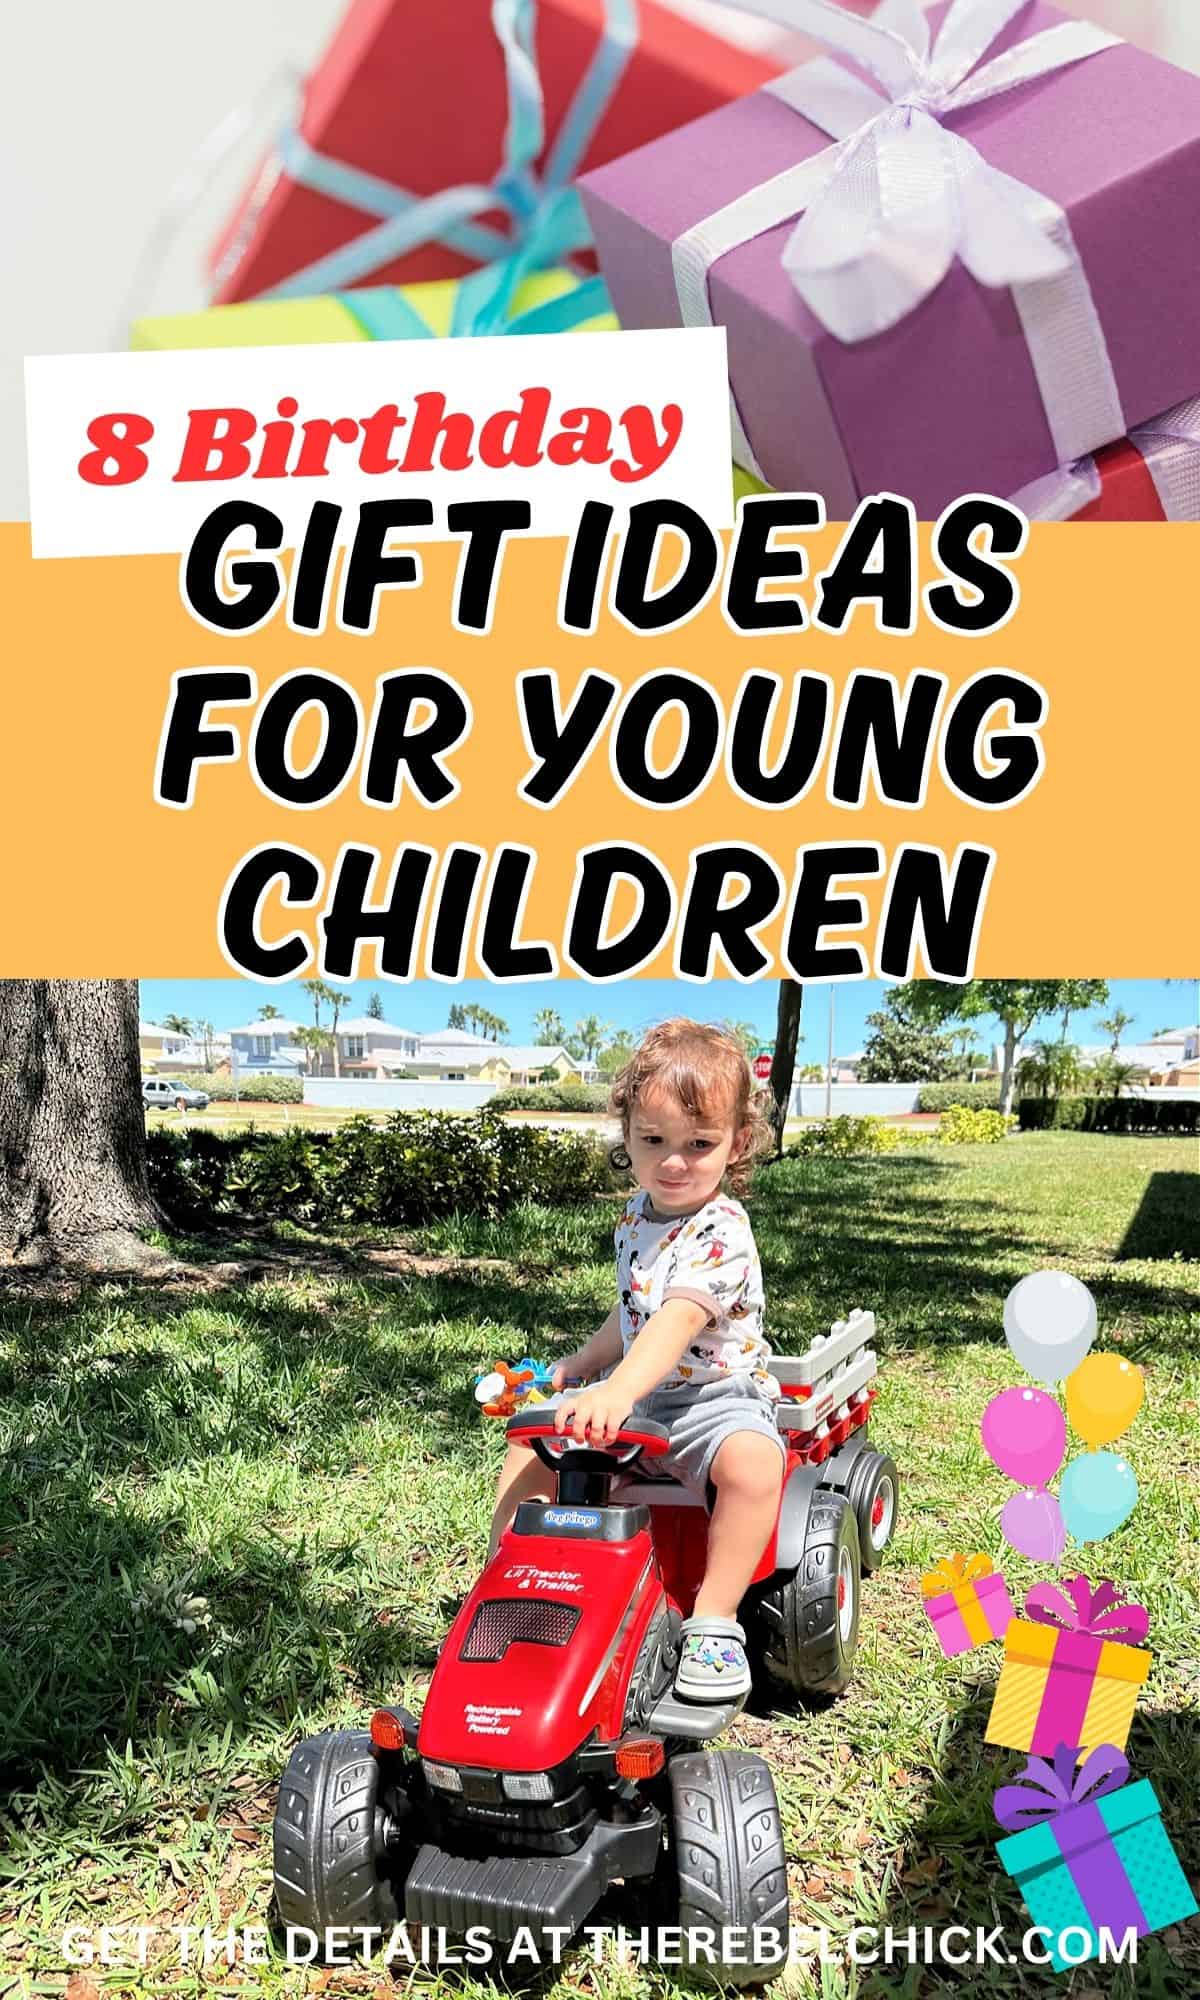 Birthday Gift Ideas for Young Children